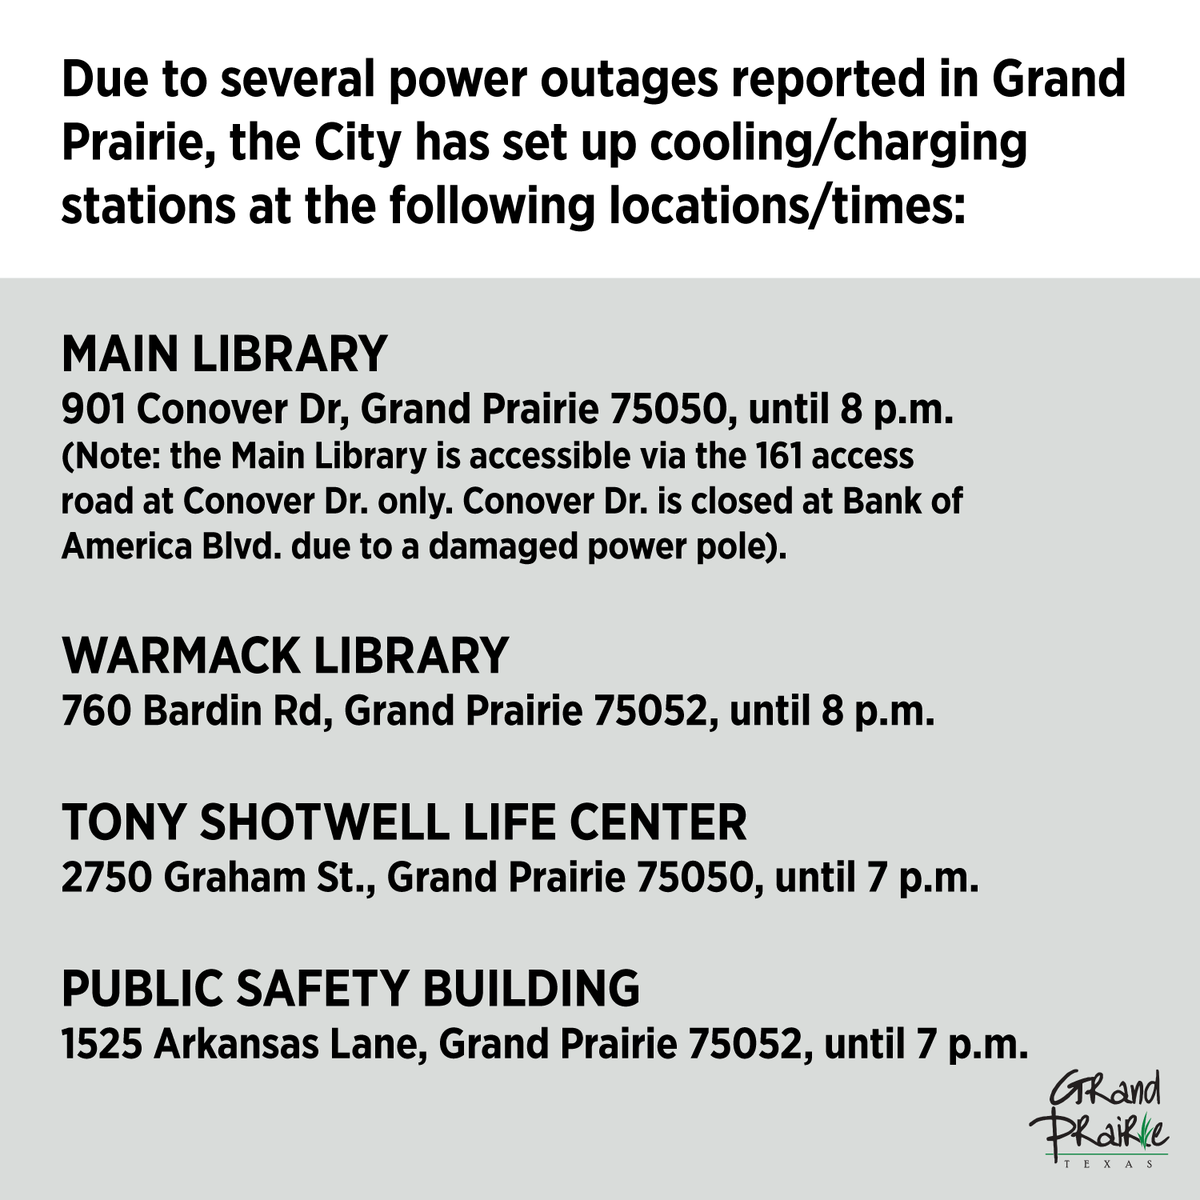 Due to several power outages reported, the City has set up cooling/charging stations at the following locations:

Warmack Library | Open until 8 p.m.
Tony Shotwell Life Center | Open until 7 p.m.
Public Safety Building | Open until 7 p.m. 
Main Library | Open until 8 p.m.